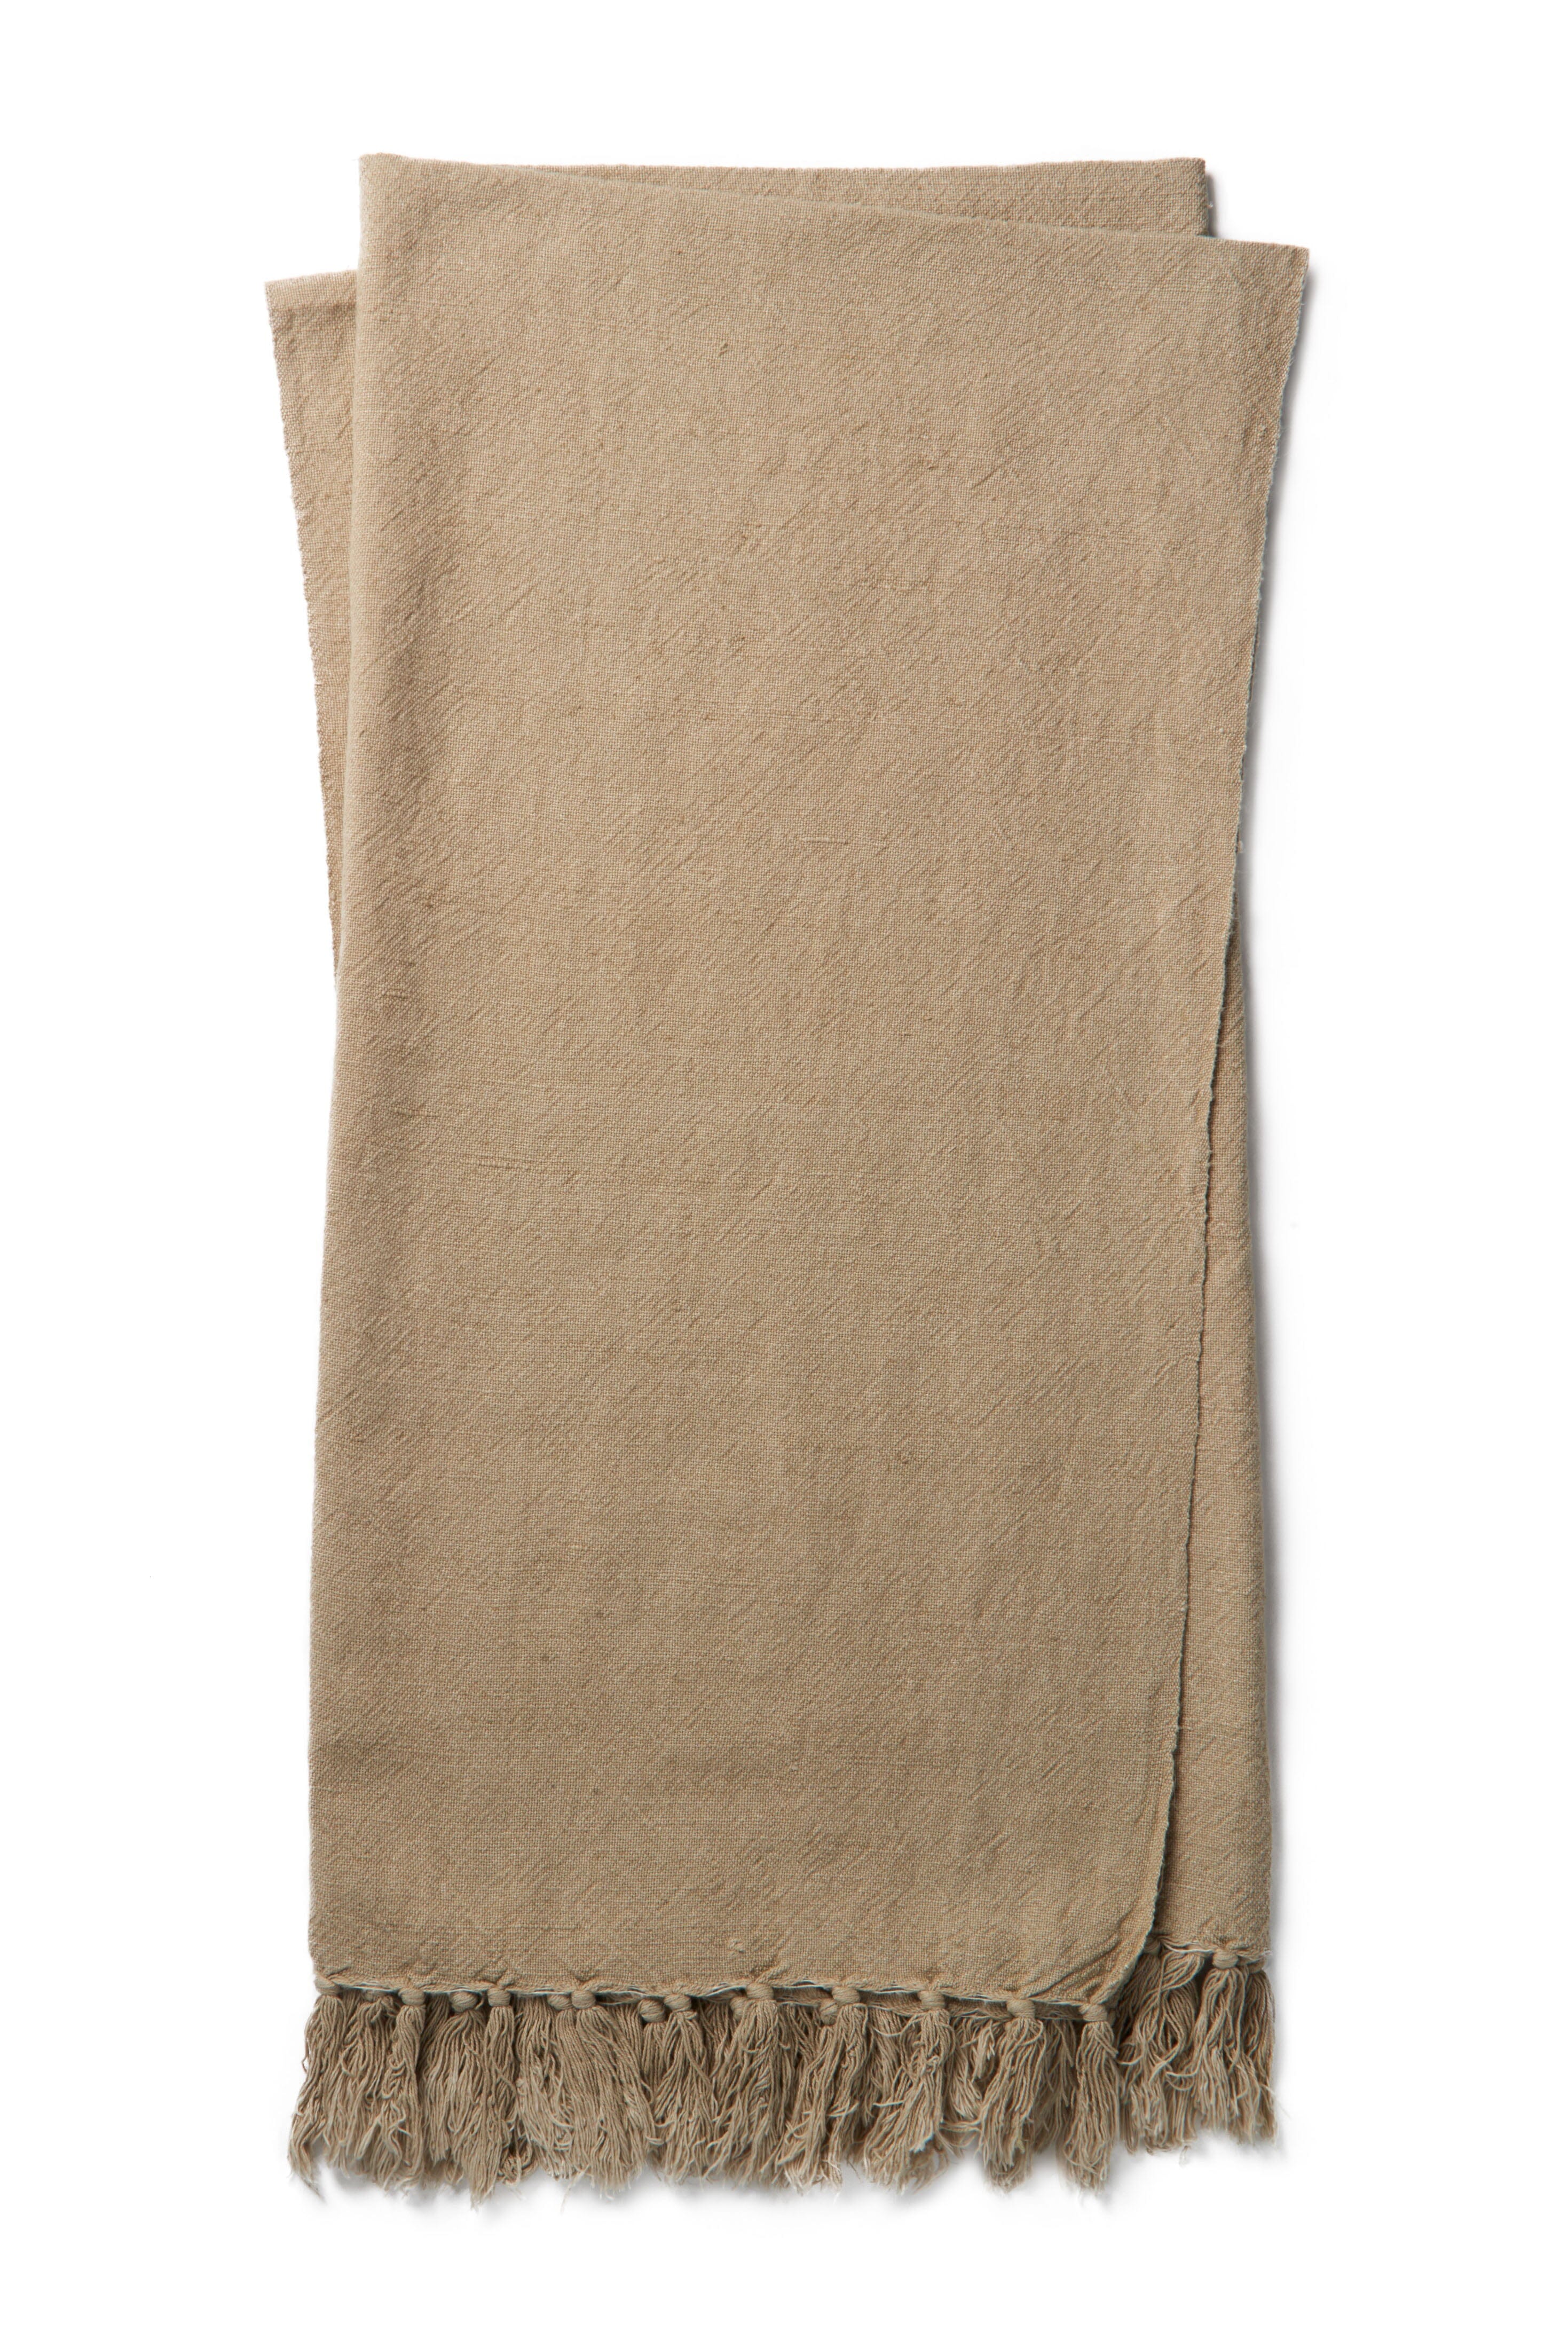 ED Ellen DeGeneres Crafted by Loloi Brody Throw | Taupe ED Ellen DeGeneres Crafted by Loloi